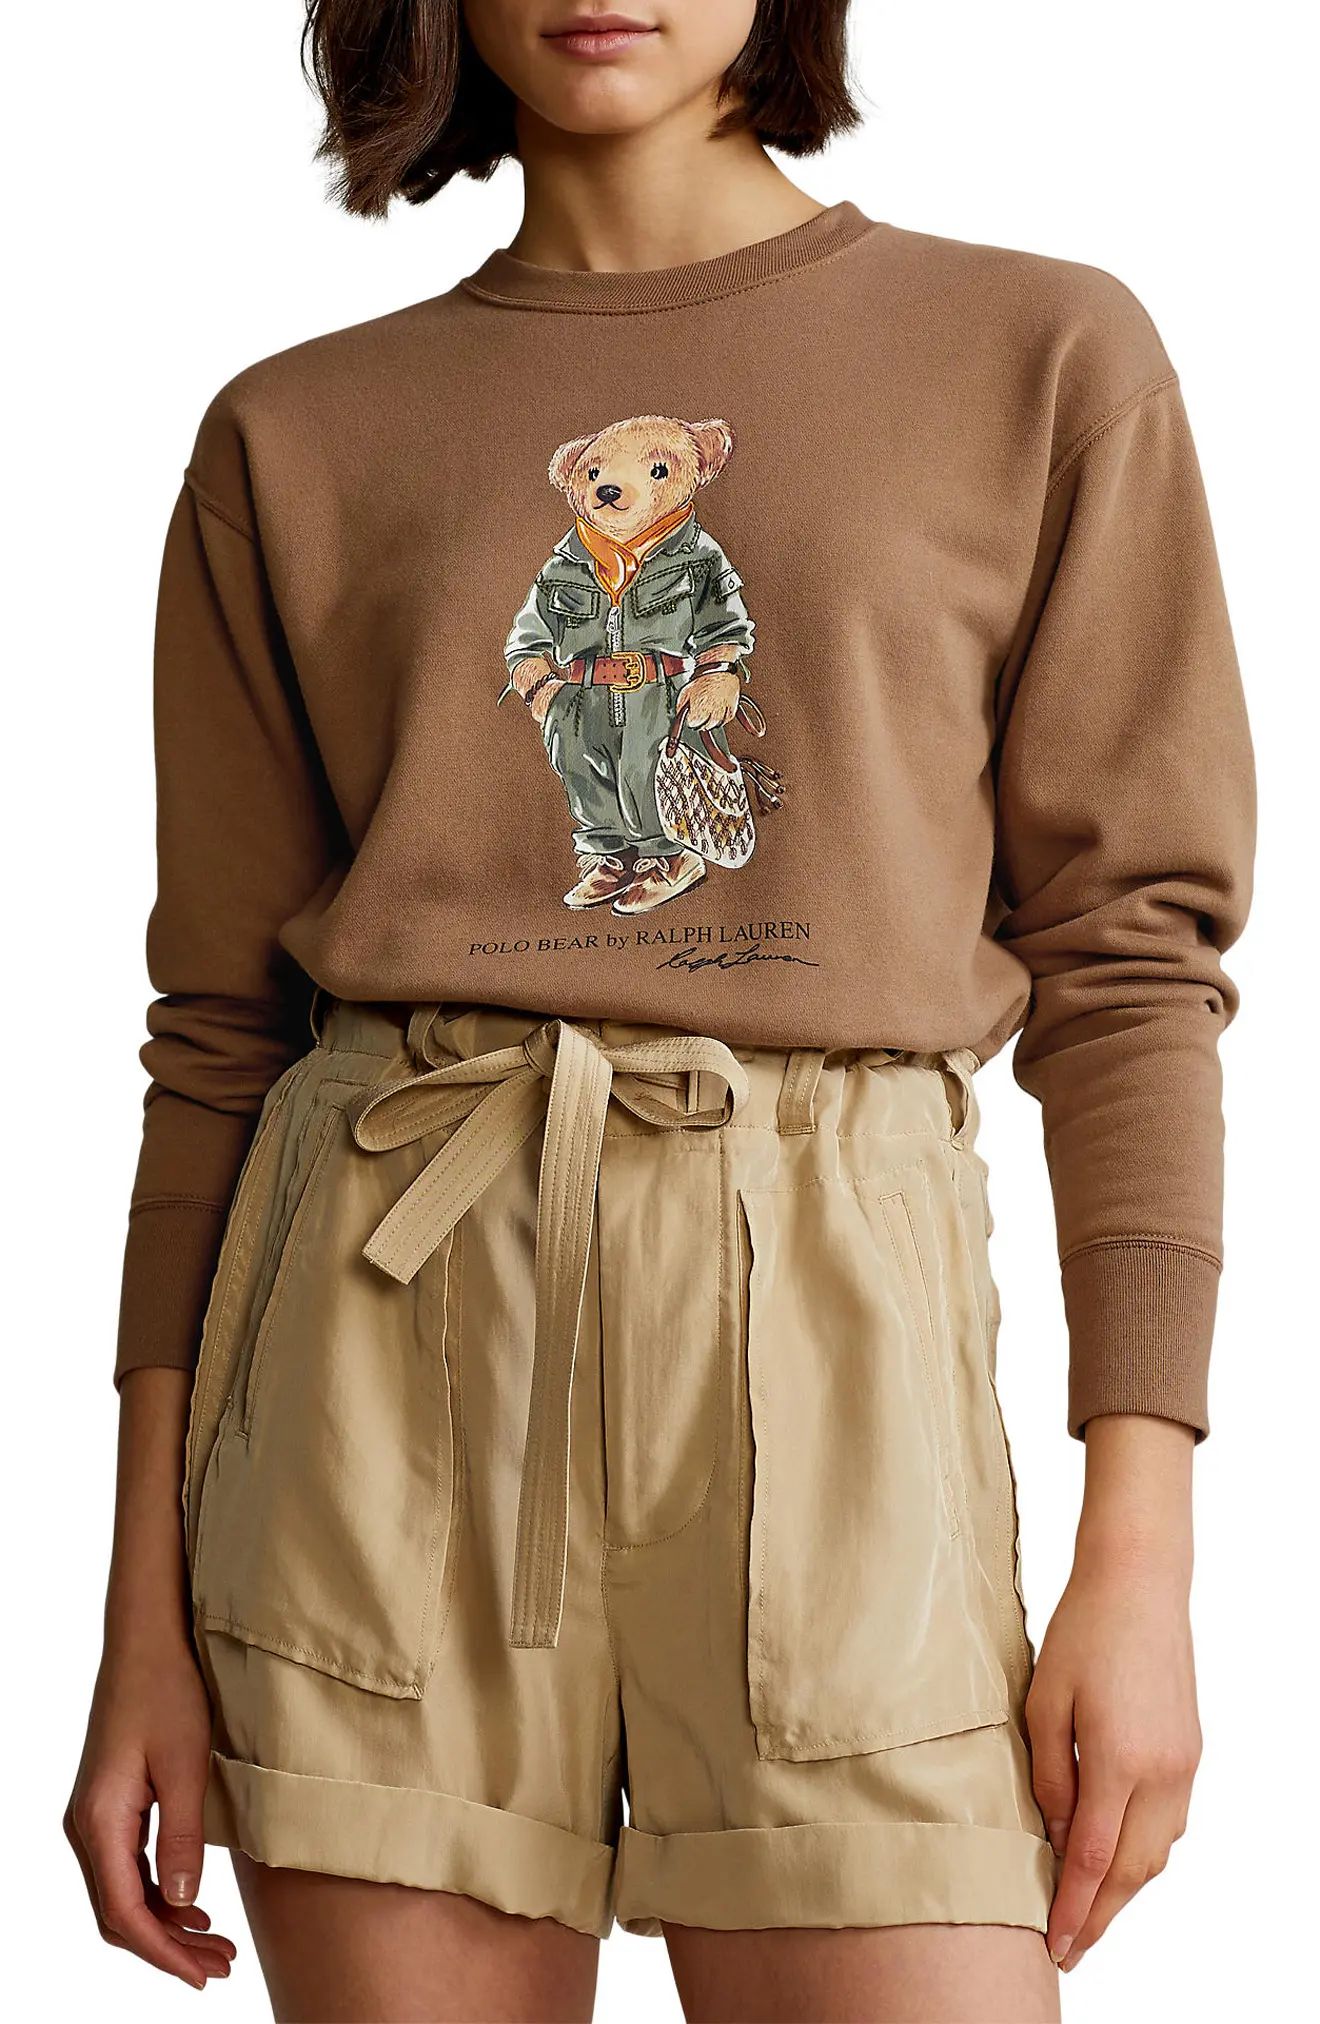 Polo Ralph Lauren Polo Bear Cotton Blend Graphic Sweatshirt in Taupe at Nordstrom, Size Small | Nordstrom